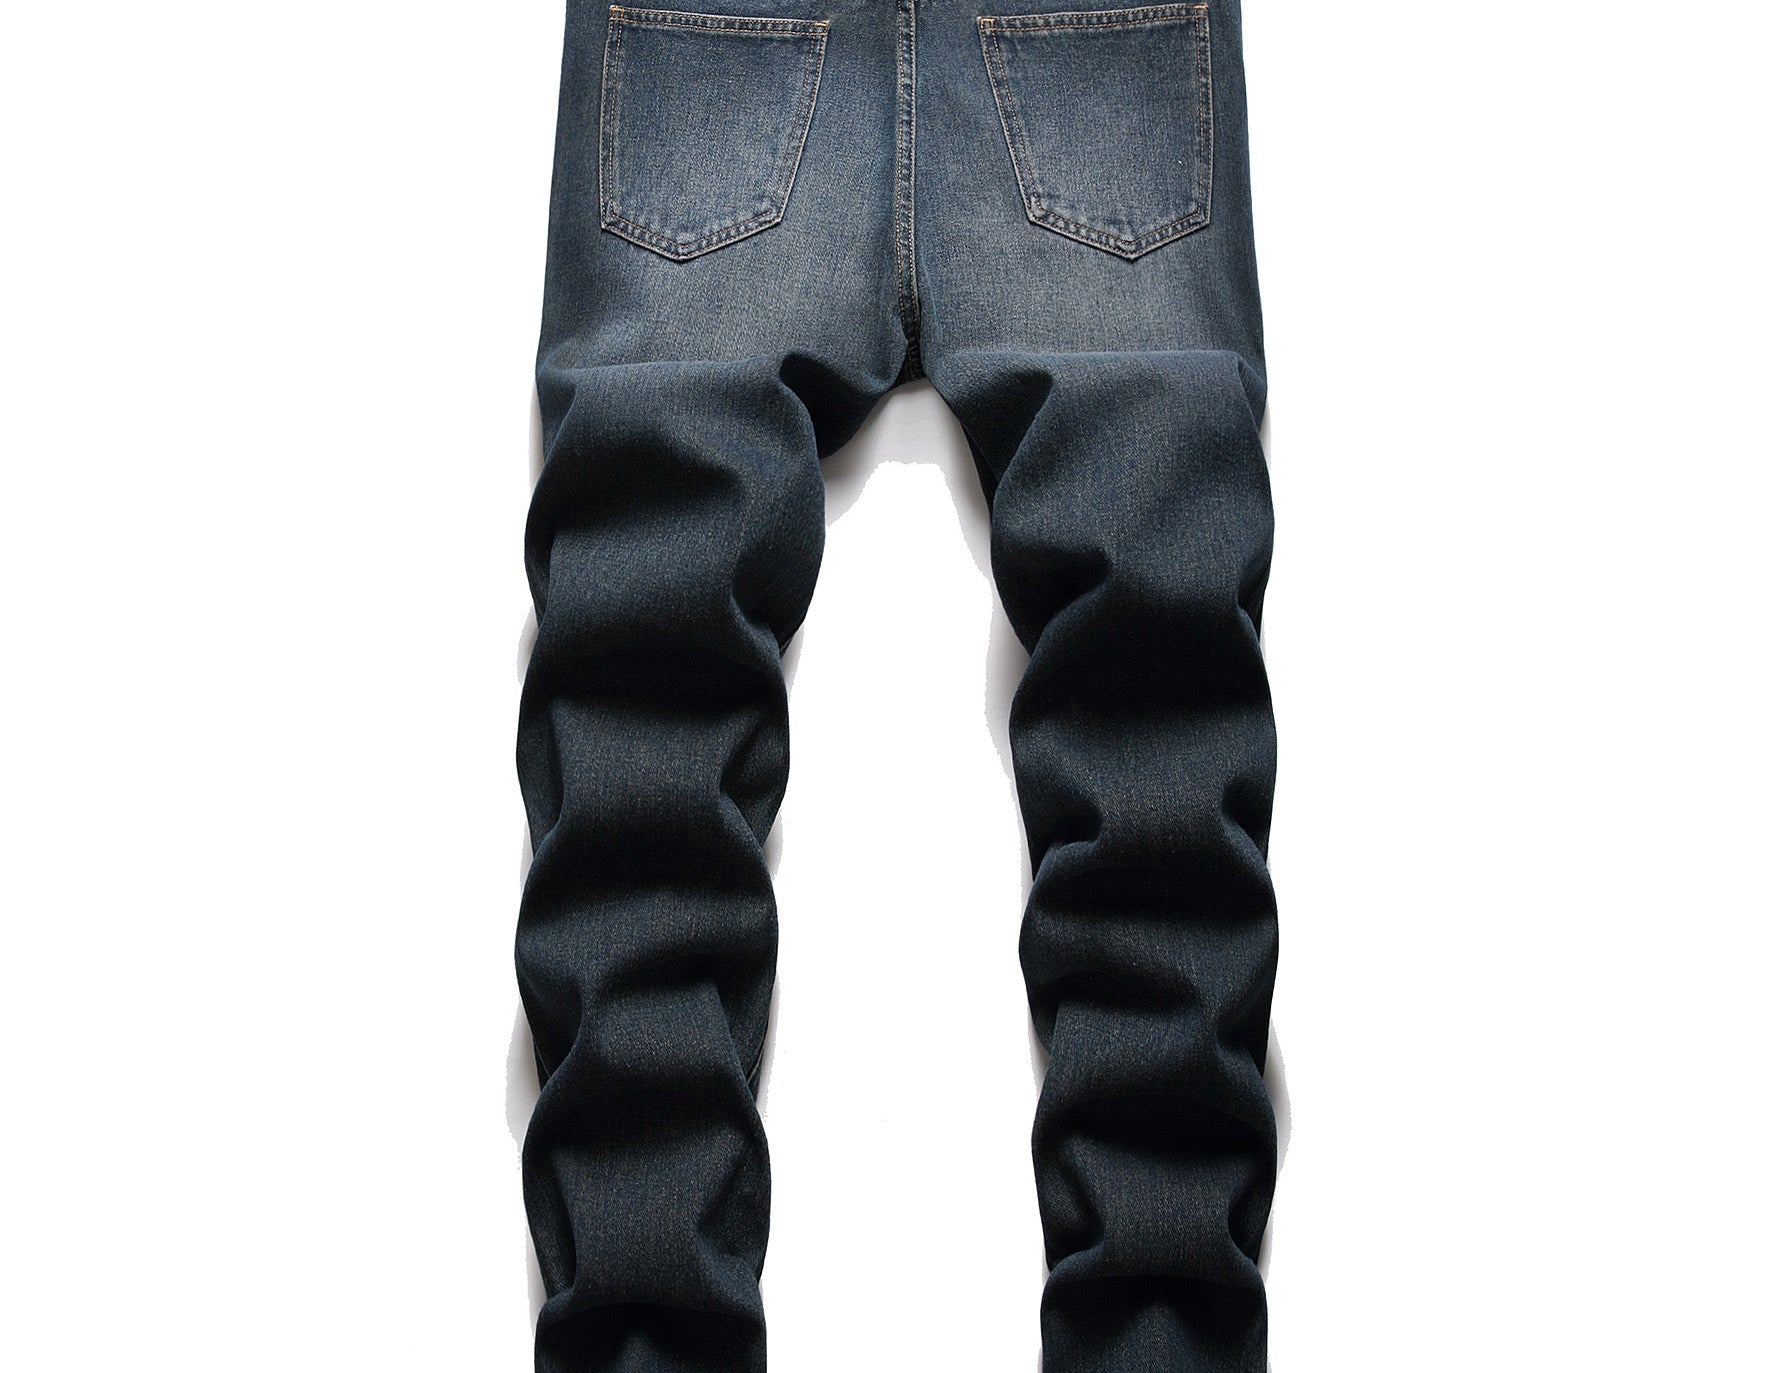 KOOF - Denim Jeans for Men - Sarman Fashion - Wholesale Clothing Fashion Brand for Men from Canada